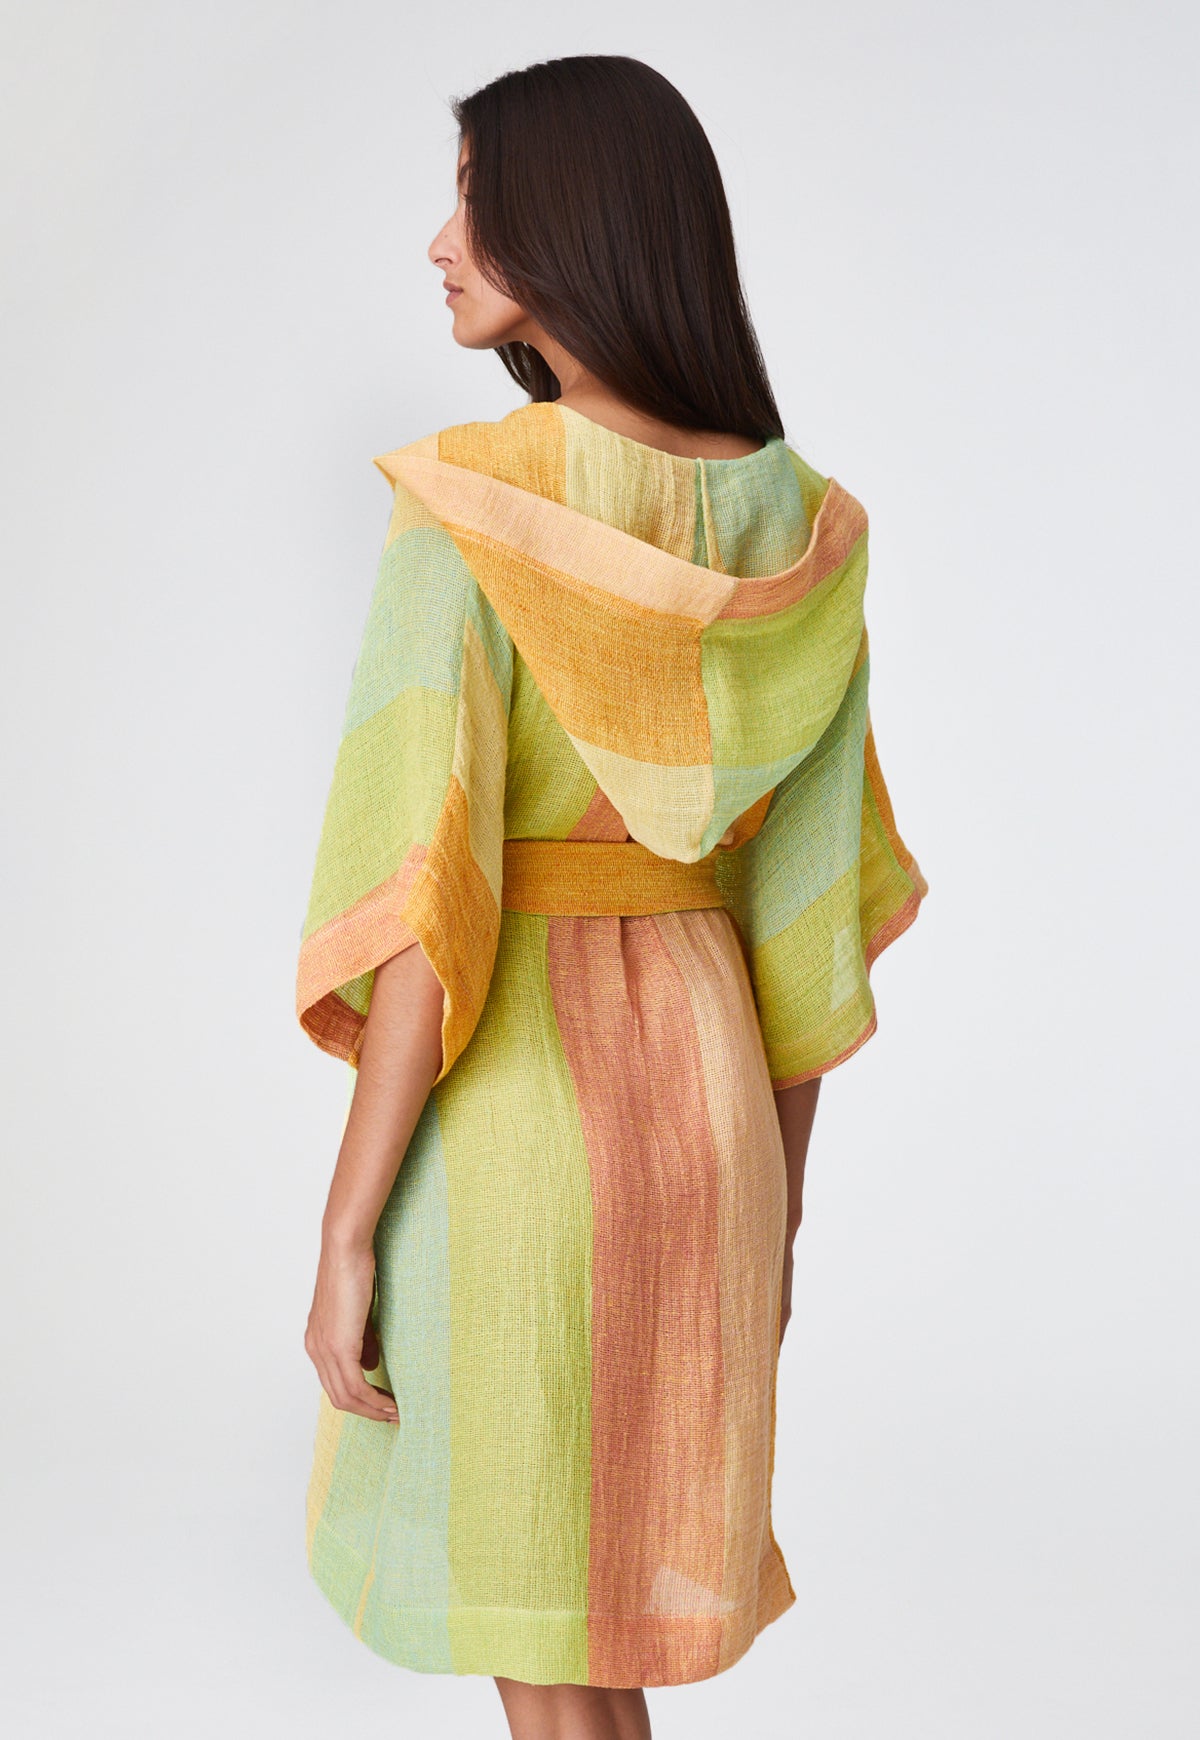 THE DRESSING GOWN in CITRUS AWNING STRIPED GAUZE